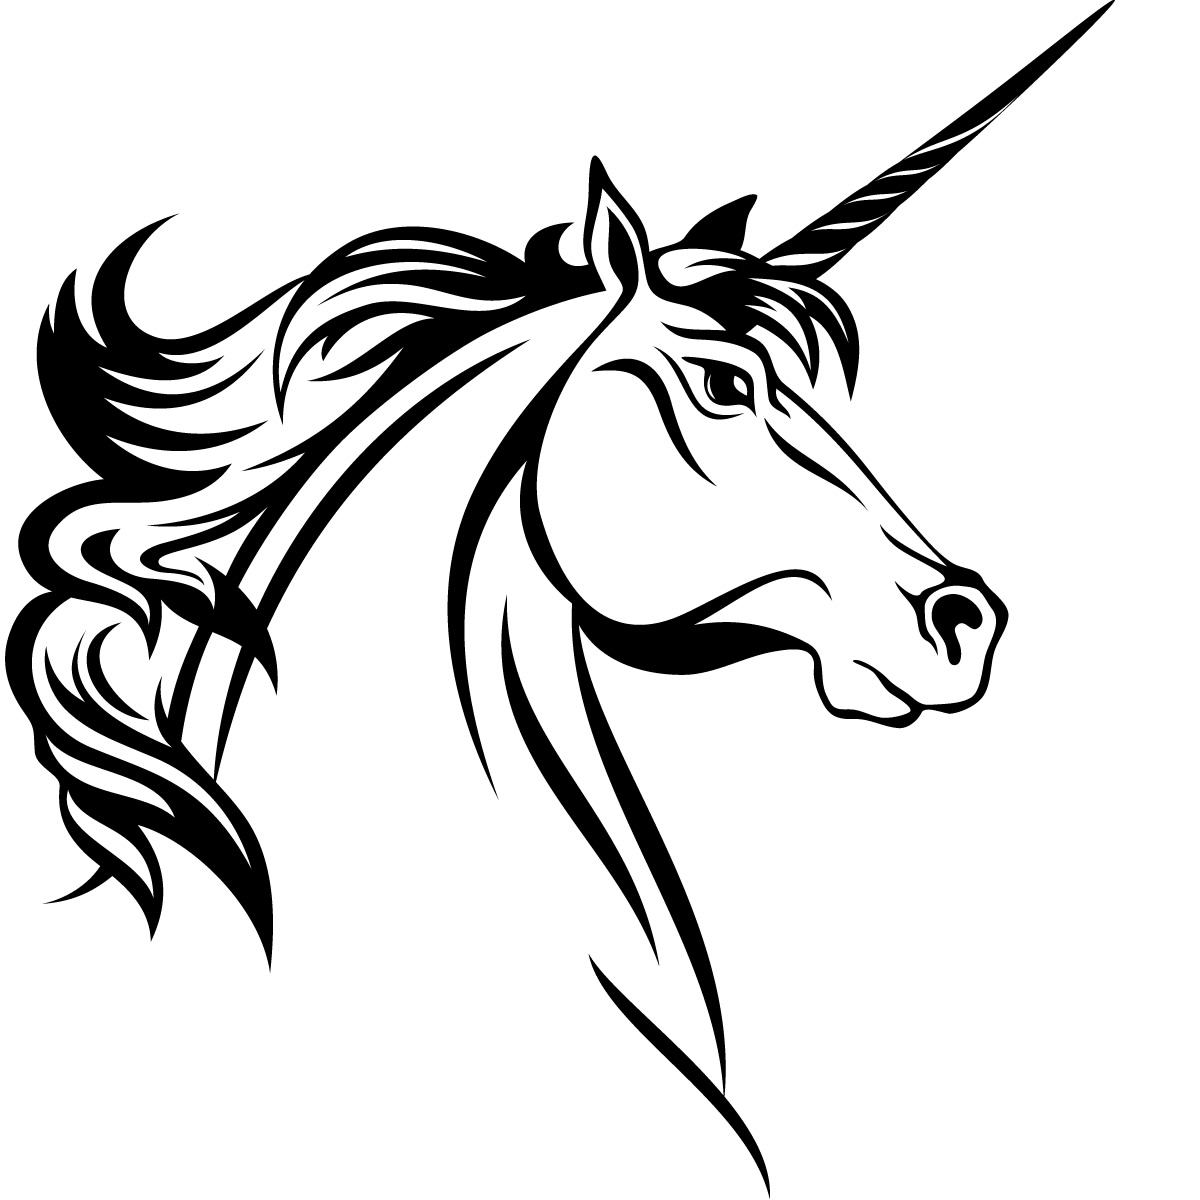 Unicorn Black And White | Free download on ClipArtMag